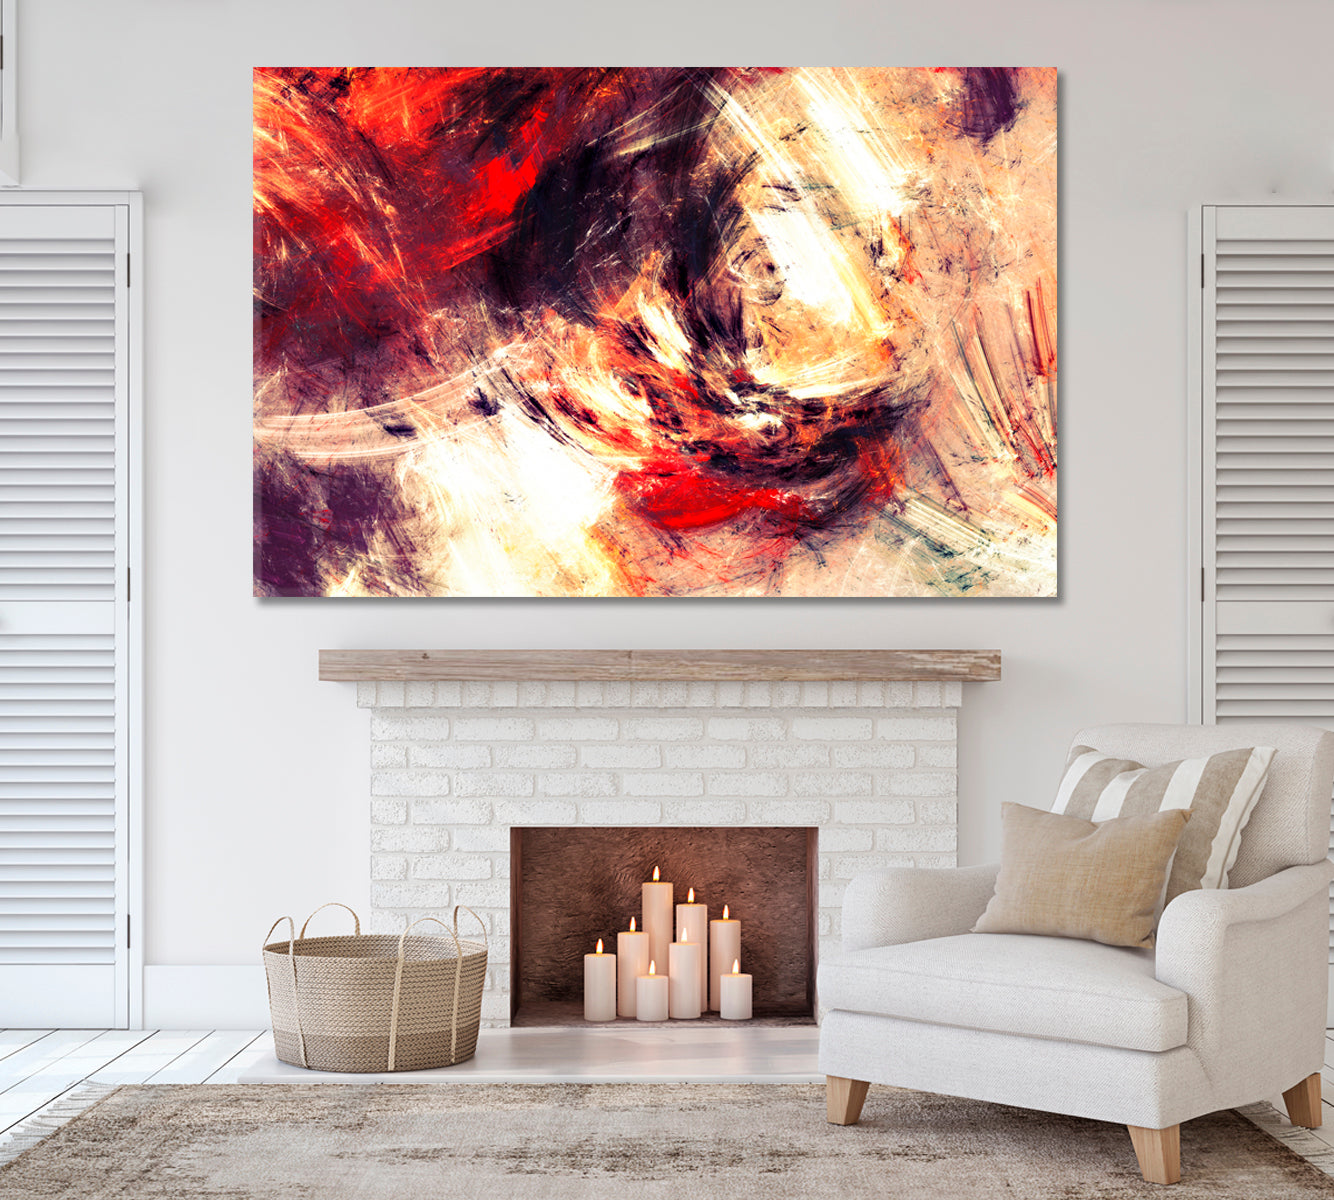 Bright Artistic Splashes Abstract Color Modern Futuristic Dynamic Fractal Artwork Abstract Art Print Artesty 1 panel 24" x 16" 